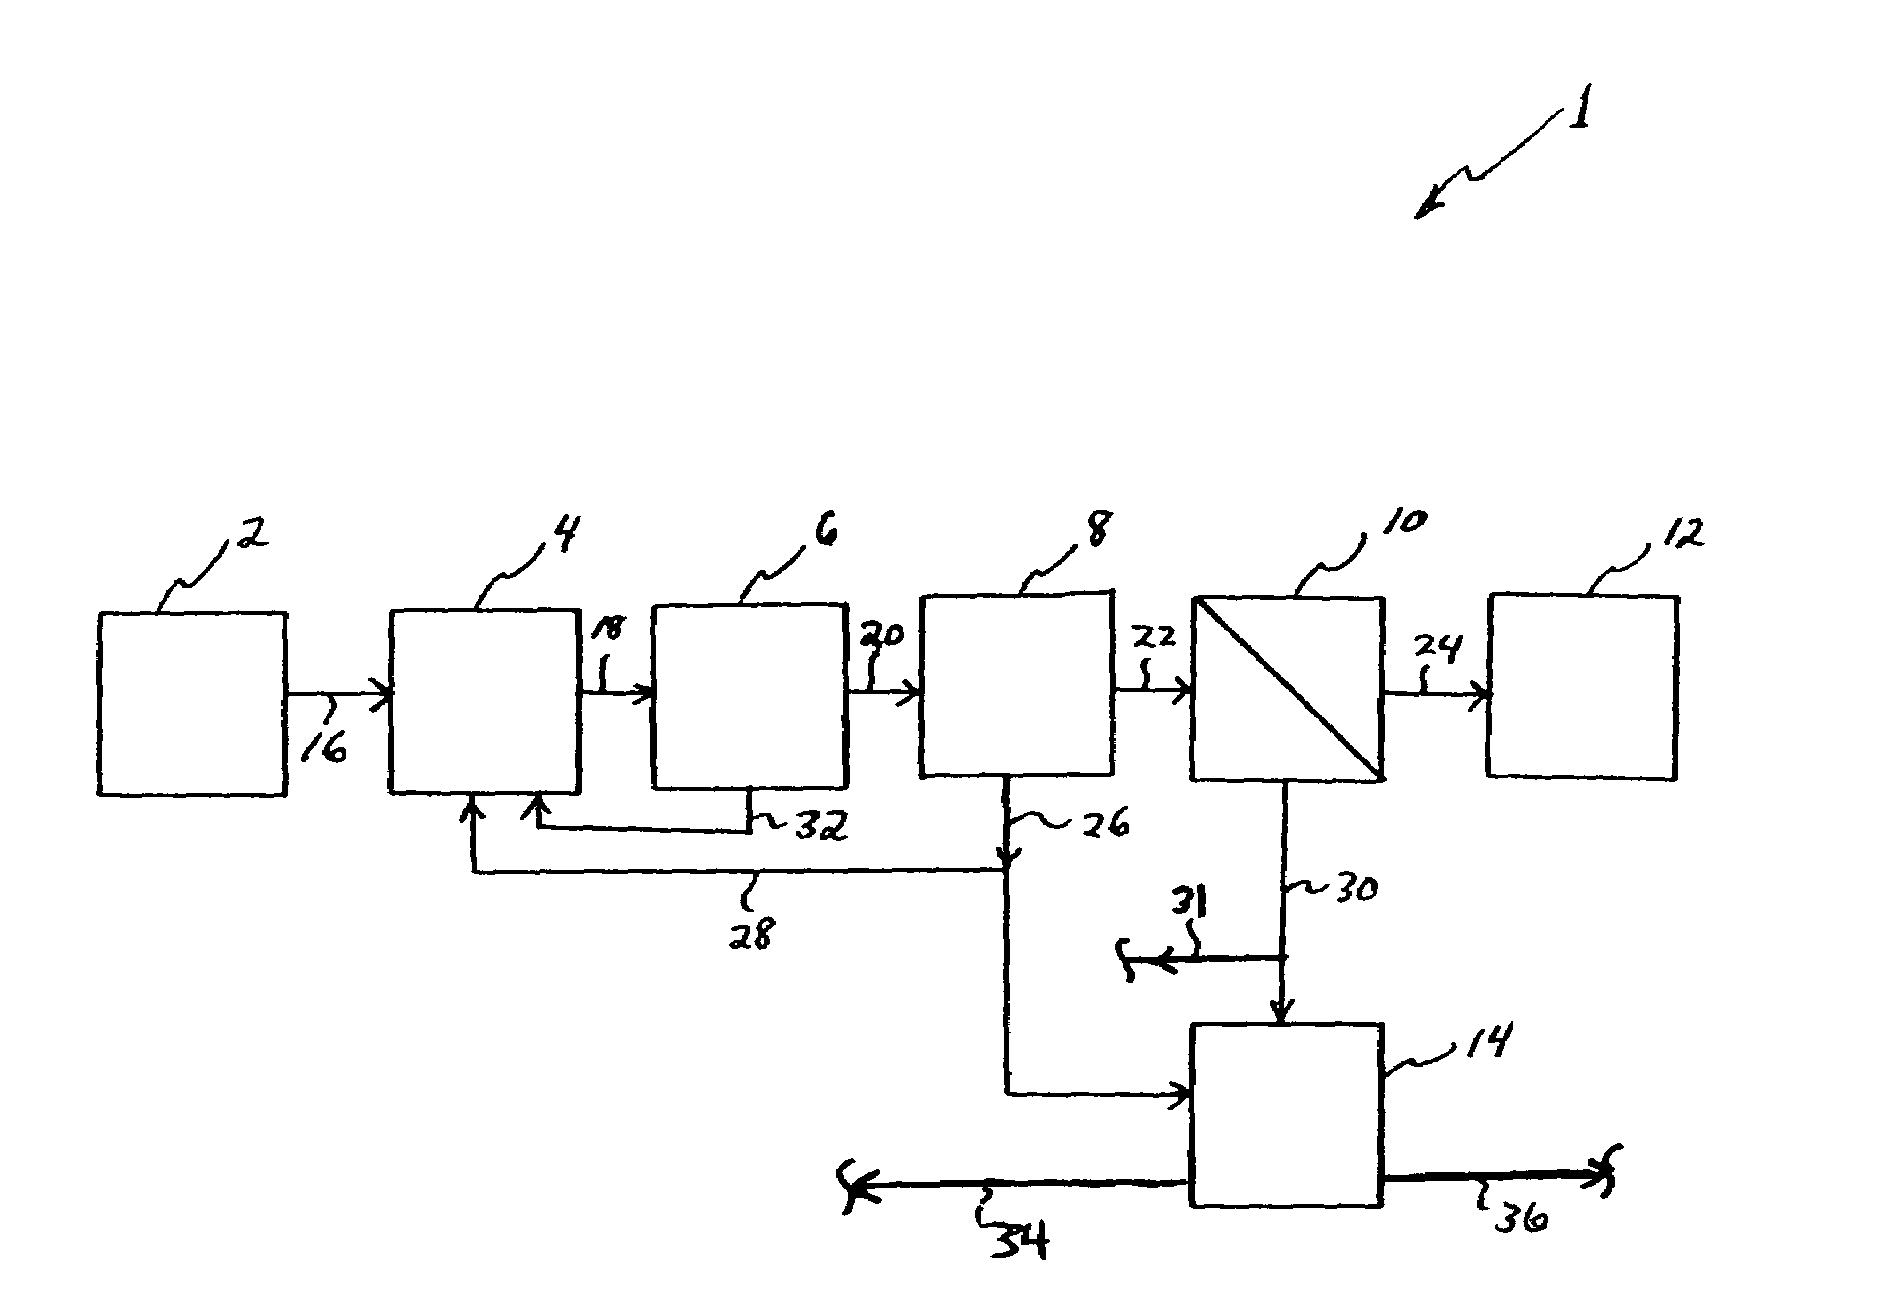 Methods and apparatus for treating wastewater employing a high rate clarifier and a membrane